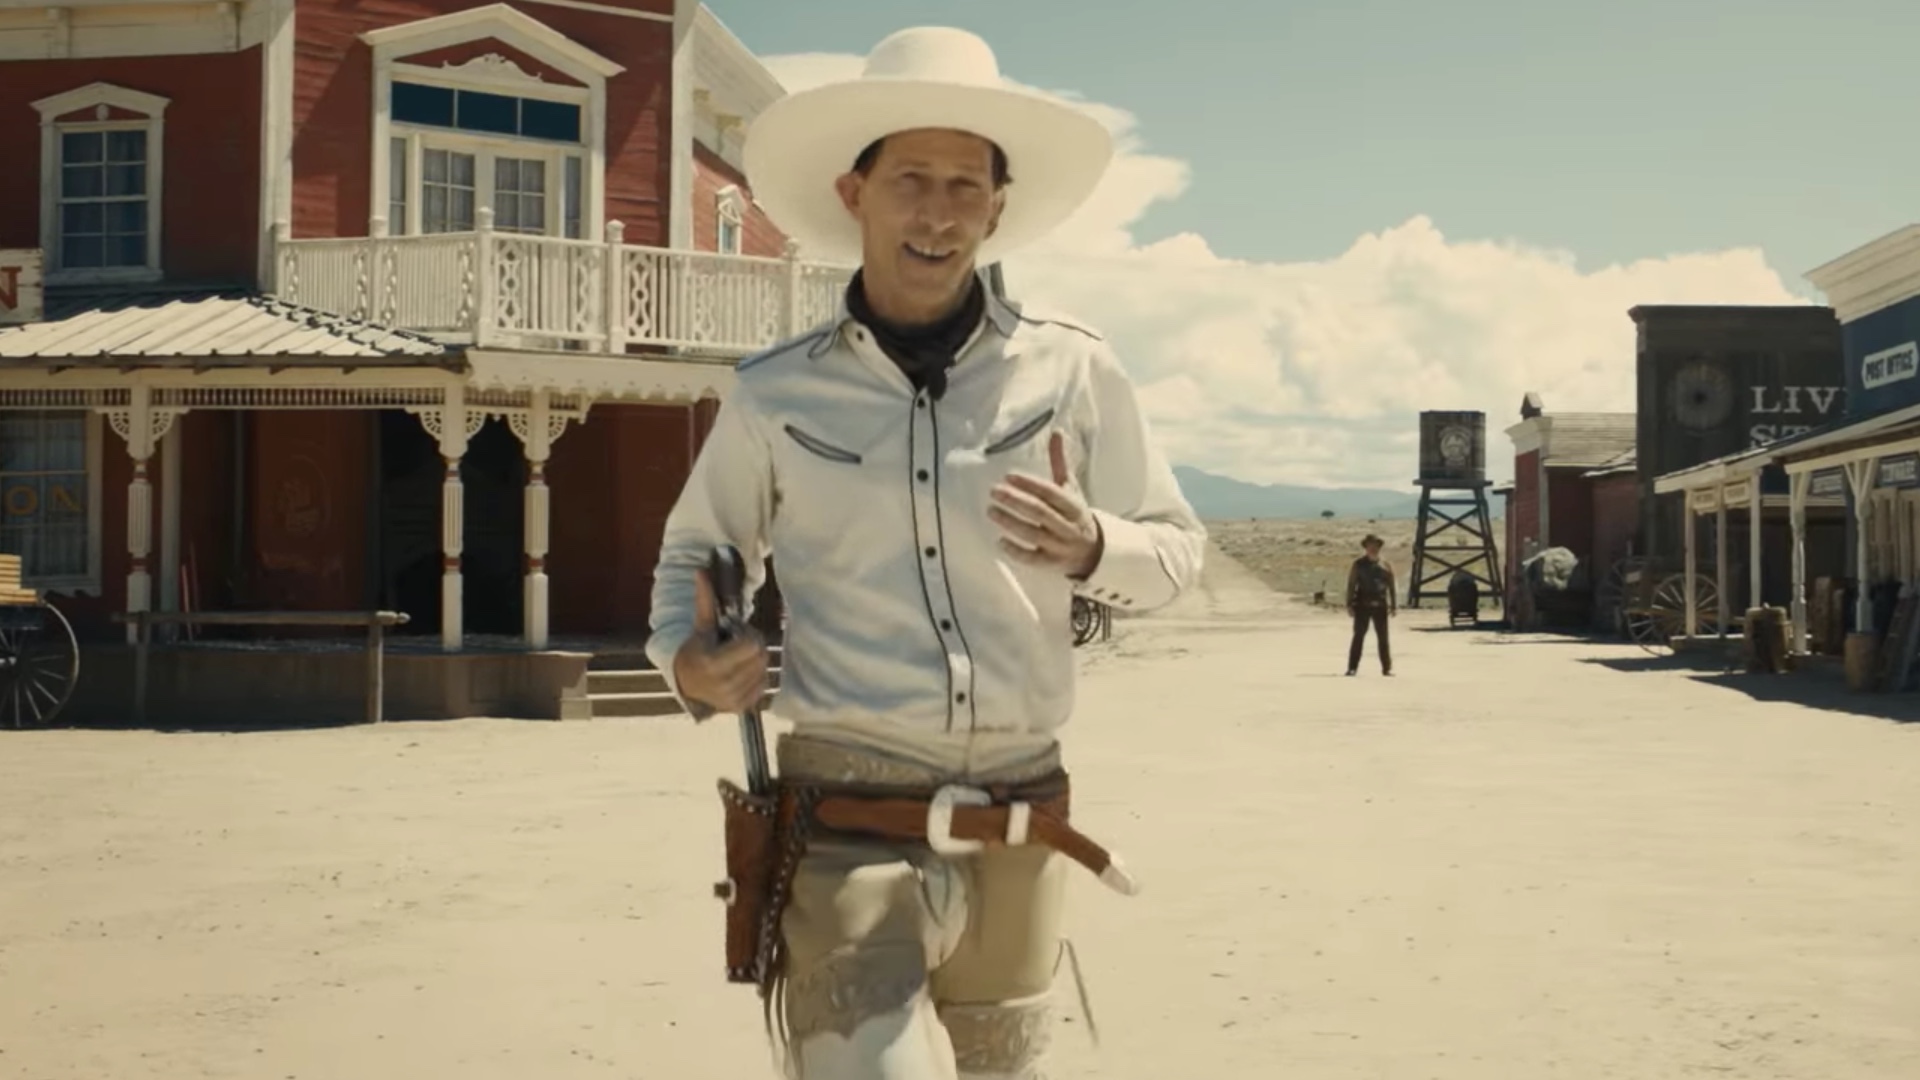 i-love-this-first-trailer-for-the-coen-bros-the-ballad-of-buster-scruggs-social